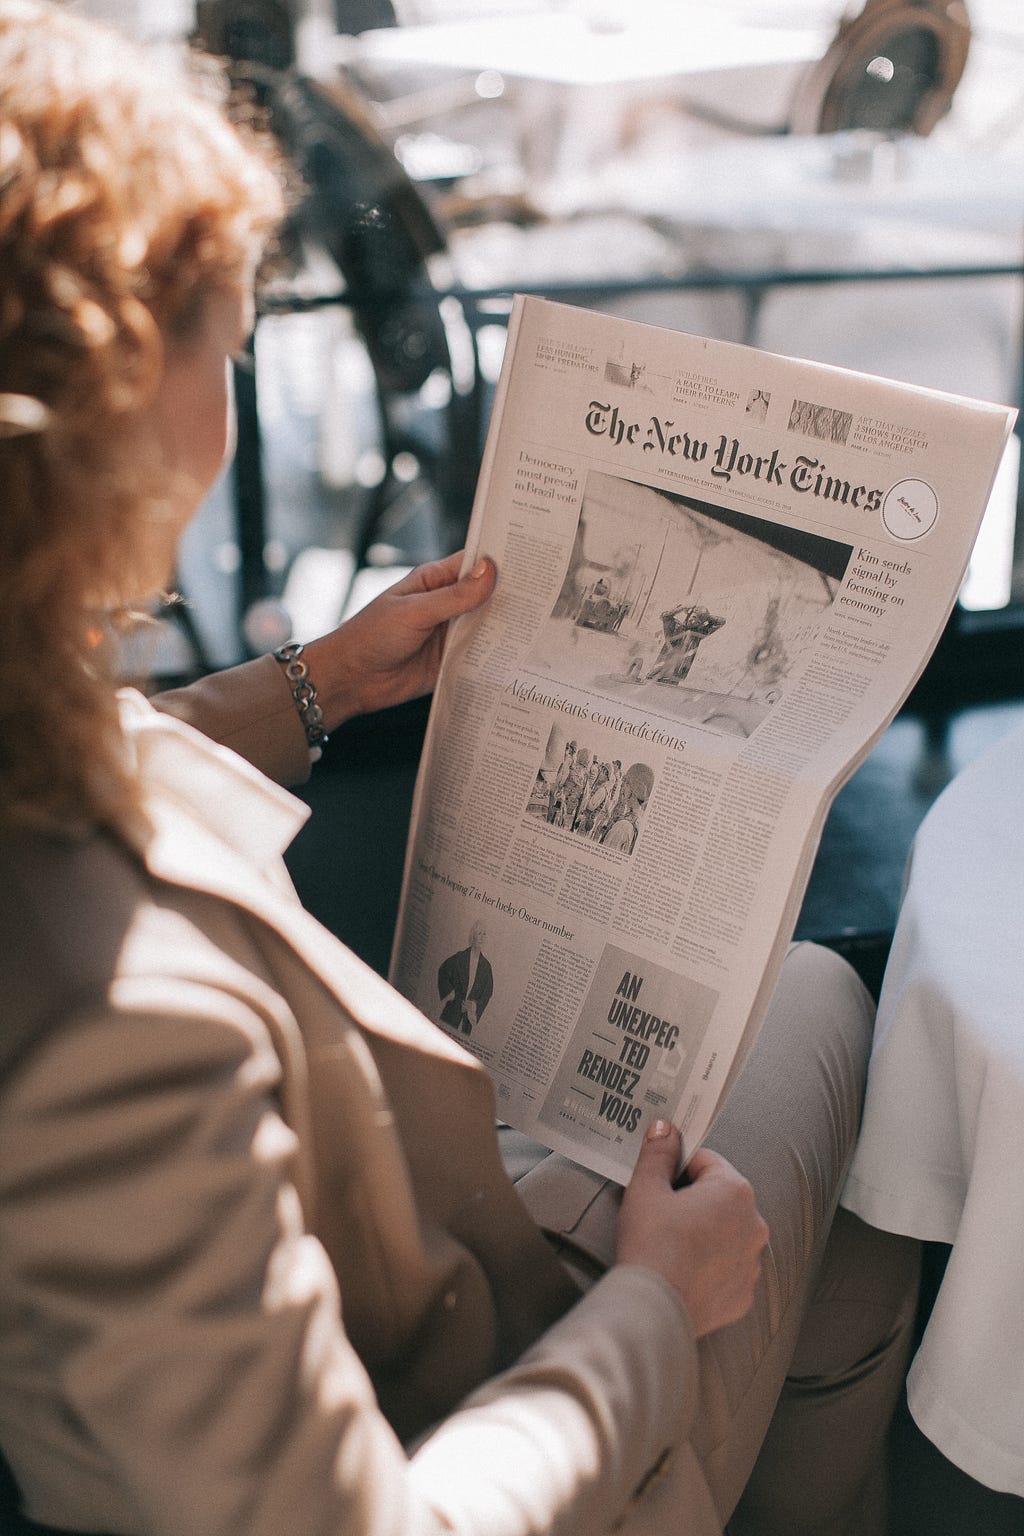 A woman is reading newspaper.